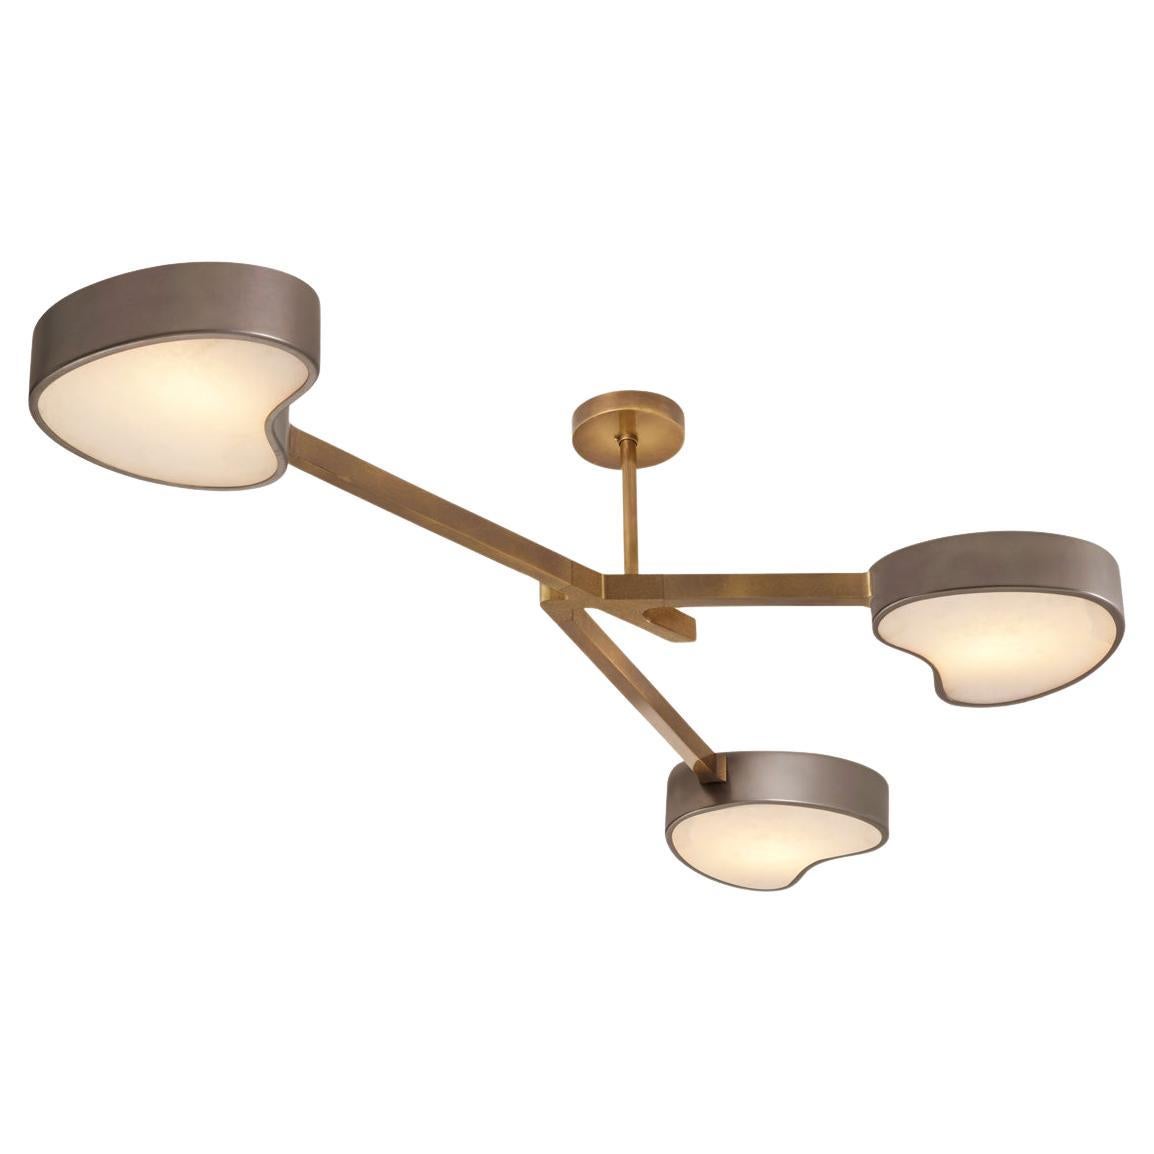 Cuore N.3 Ceiling Light by Gaspare Asaro. Peltro and Bronze Finish For Sale